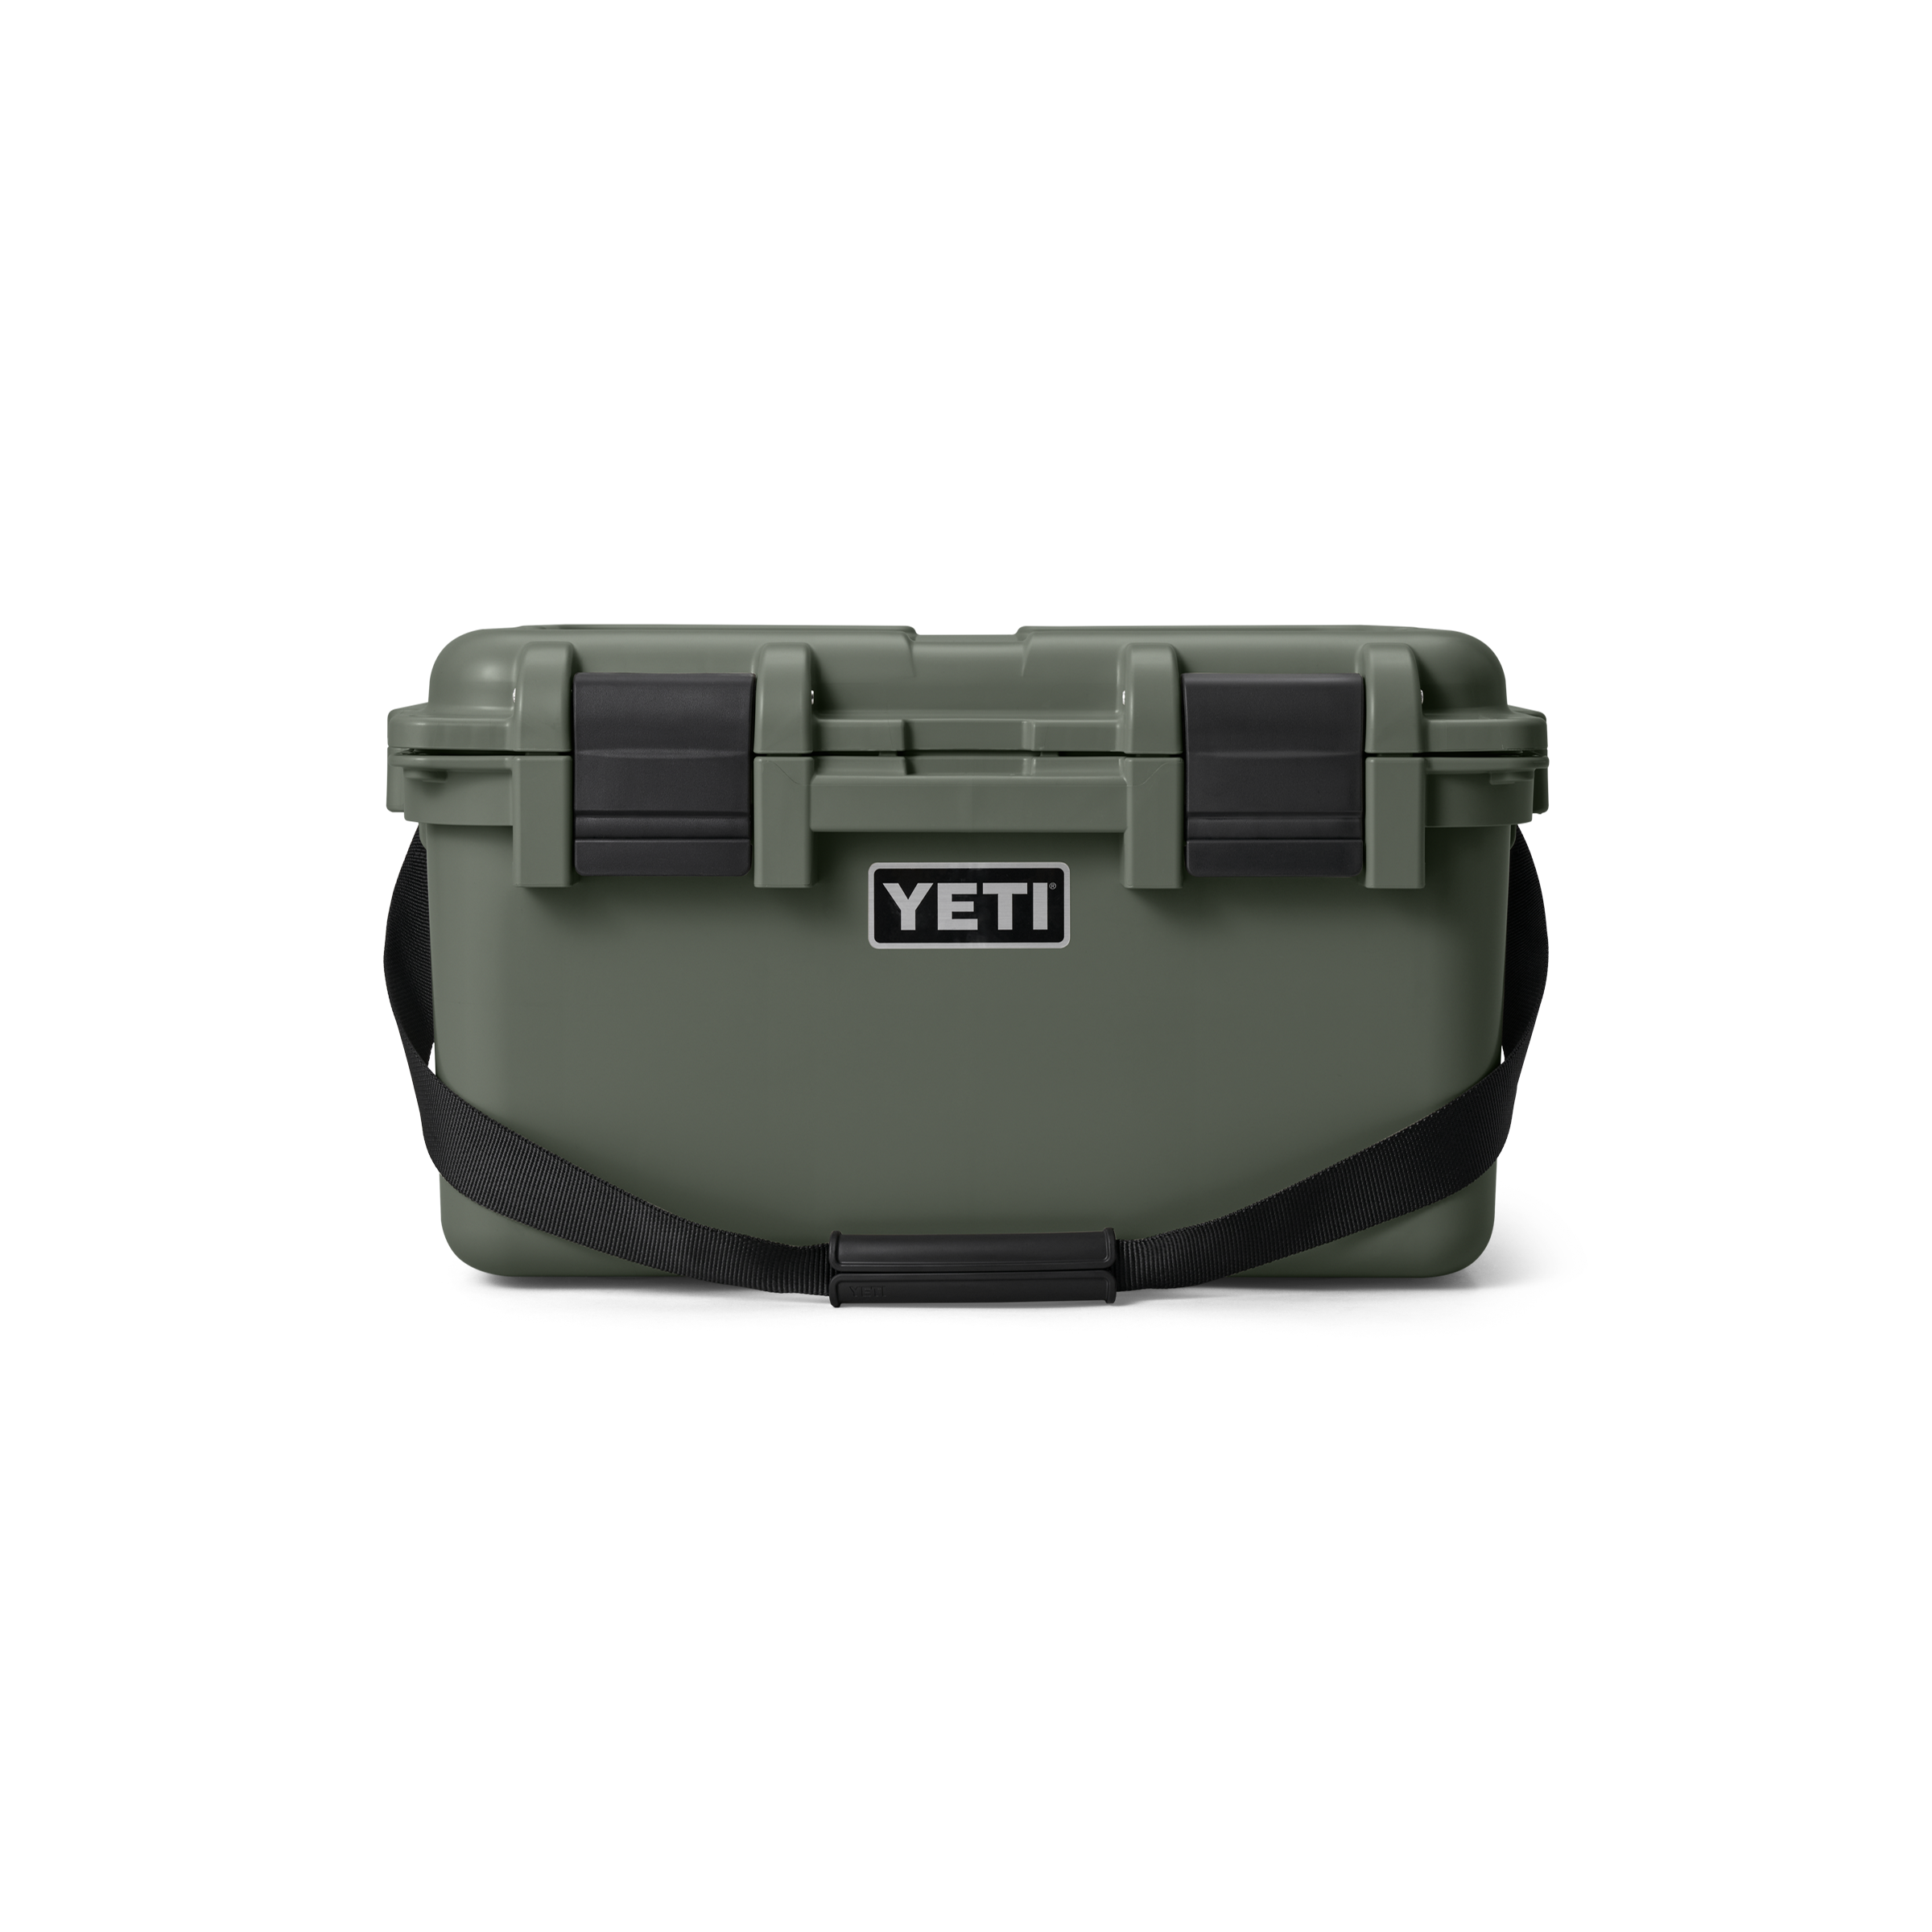 https://cdn.shopify.com/s/files/1/0225/6007/9952/files/220111_2H23_Color_Launch_site_studio_Hard_Goods_Loadout_GoBox_30_Camp_Green_Front_Closed_1202_Primary_B_2400x2400_a223276c-8329-4757-b539-3b1feb8bf88b.png?v=1691068782